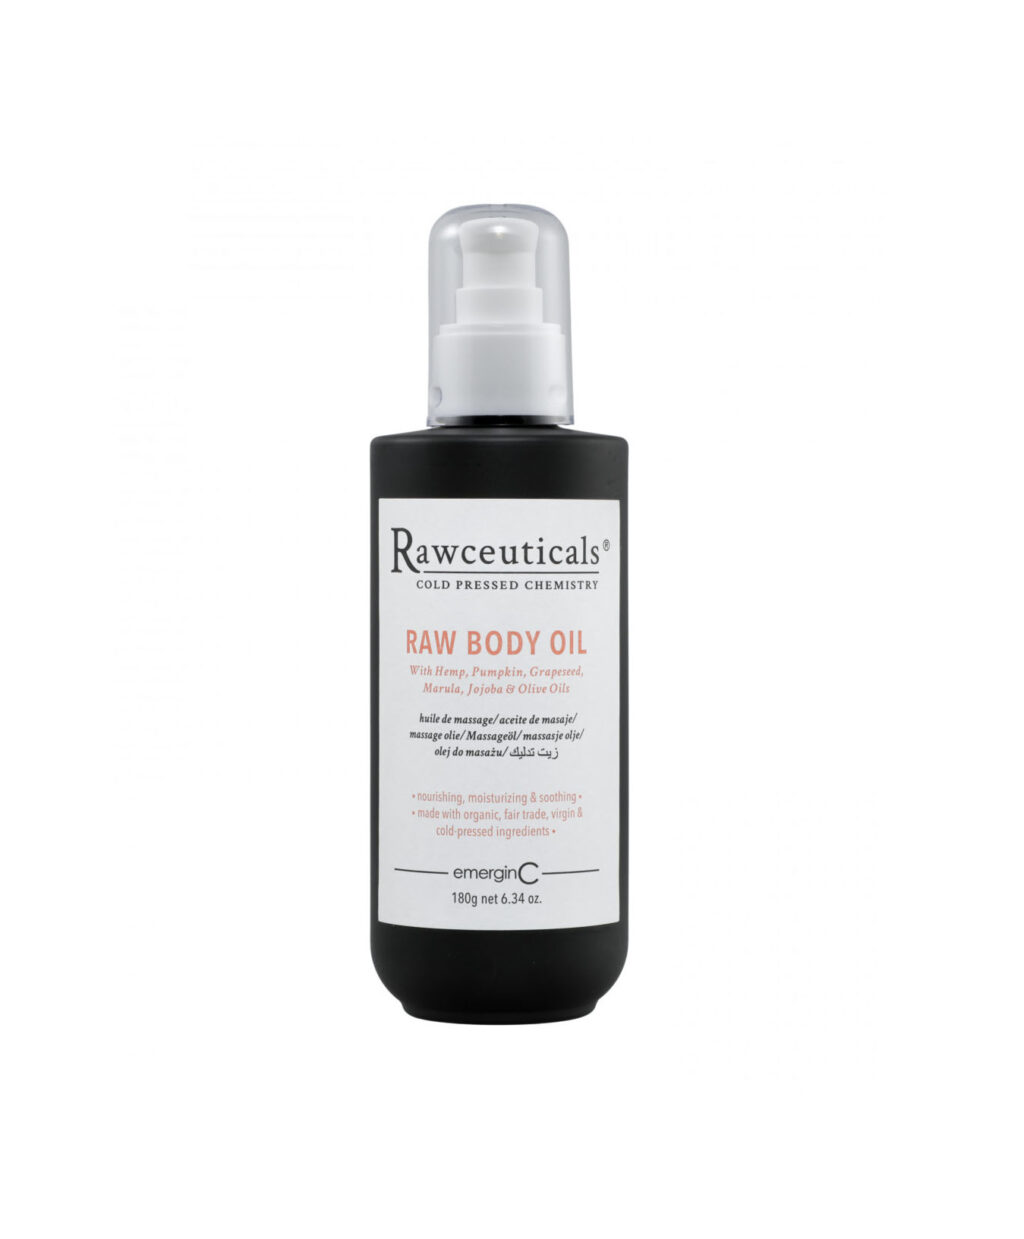 Bottle of emerginC RAW BODY OIL by rawceuticals, featuring natural ingredients like hemp, pumpkin, and cranberry oils for nourishing and hydrating skin care.